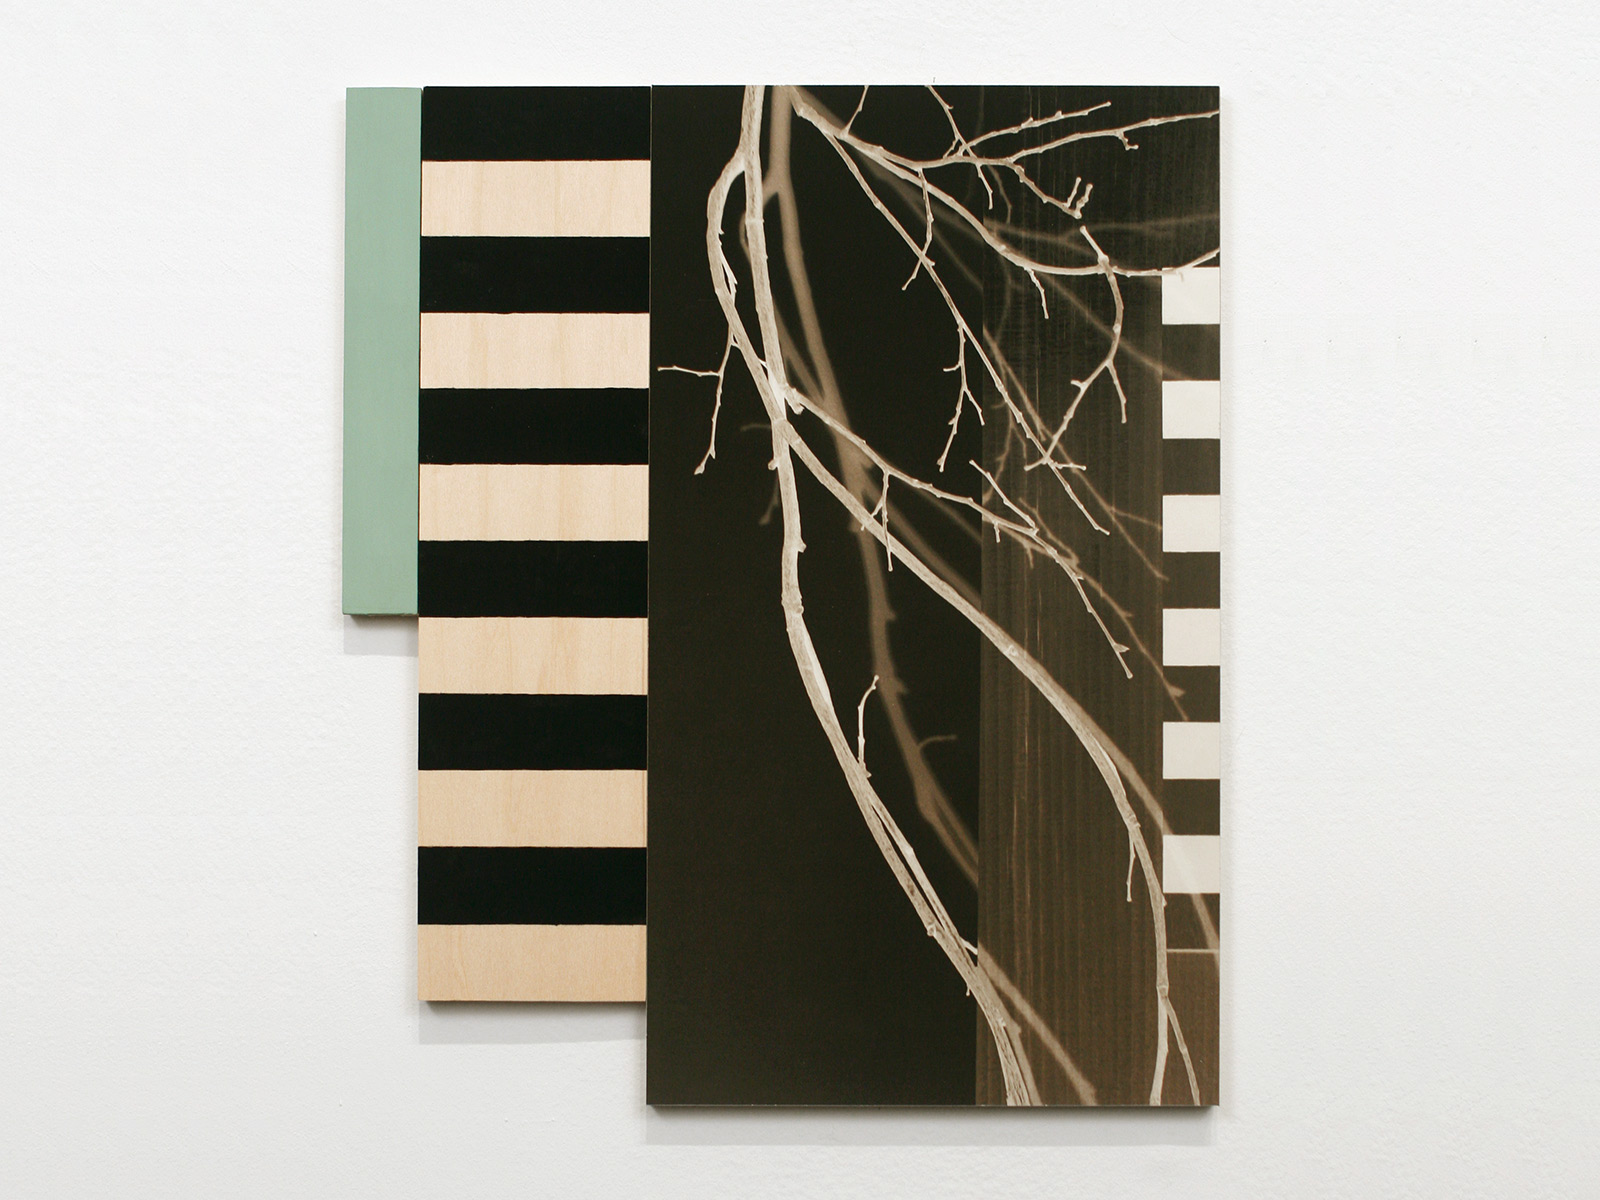 Was Green. Flashe, gouache, archival pigment print, wood. 2014.